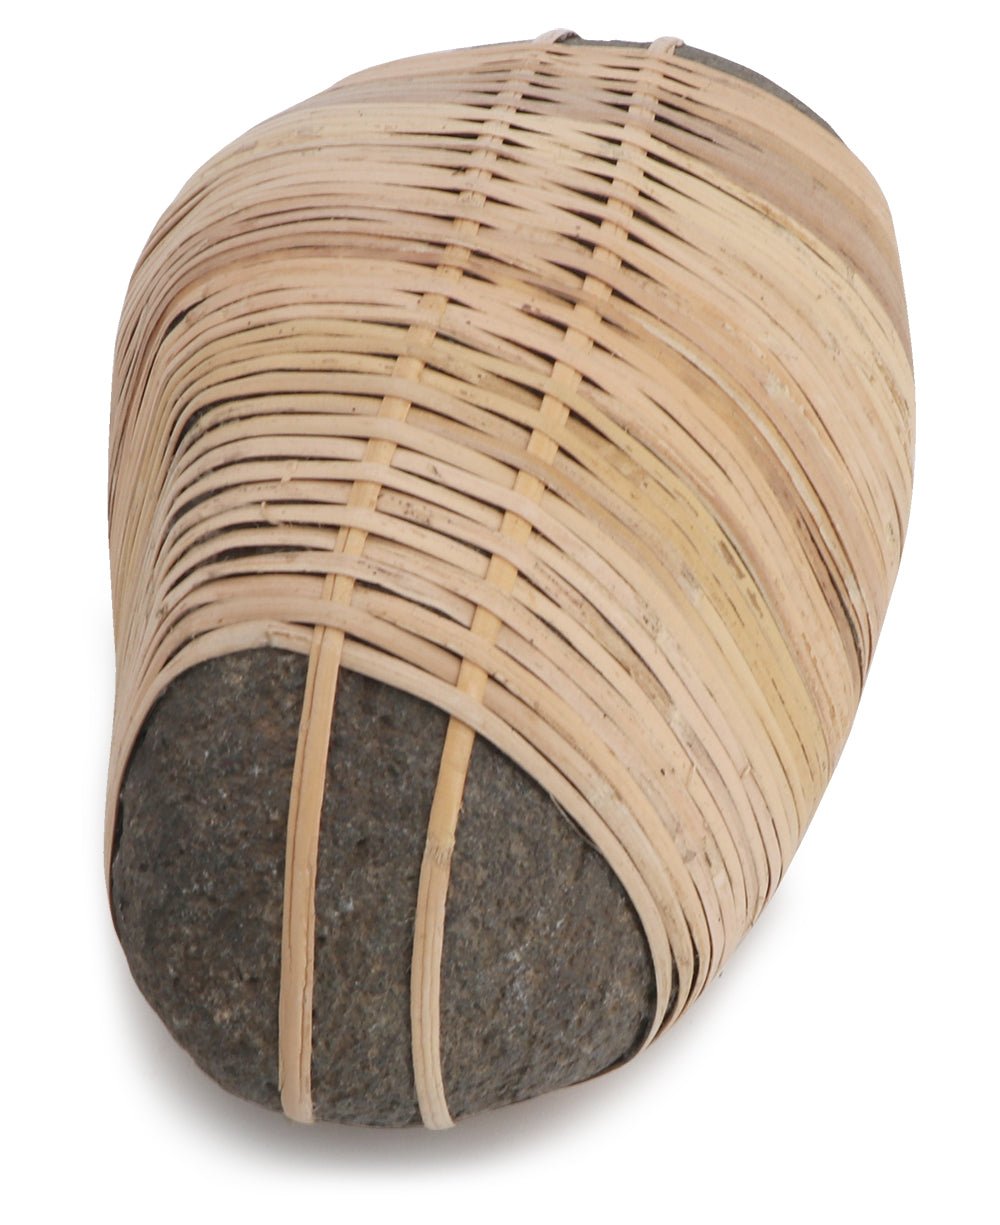 Decorative Zen Rocks With Rattan, Sold Individually - Home A